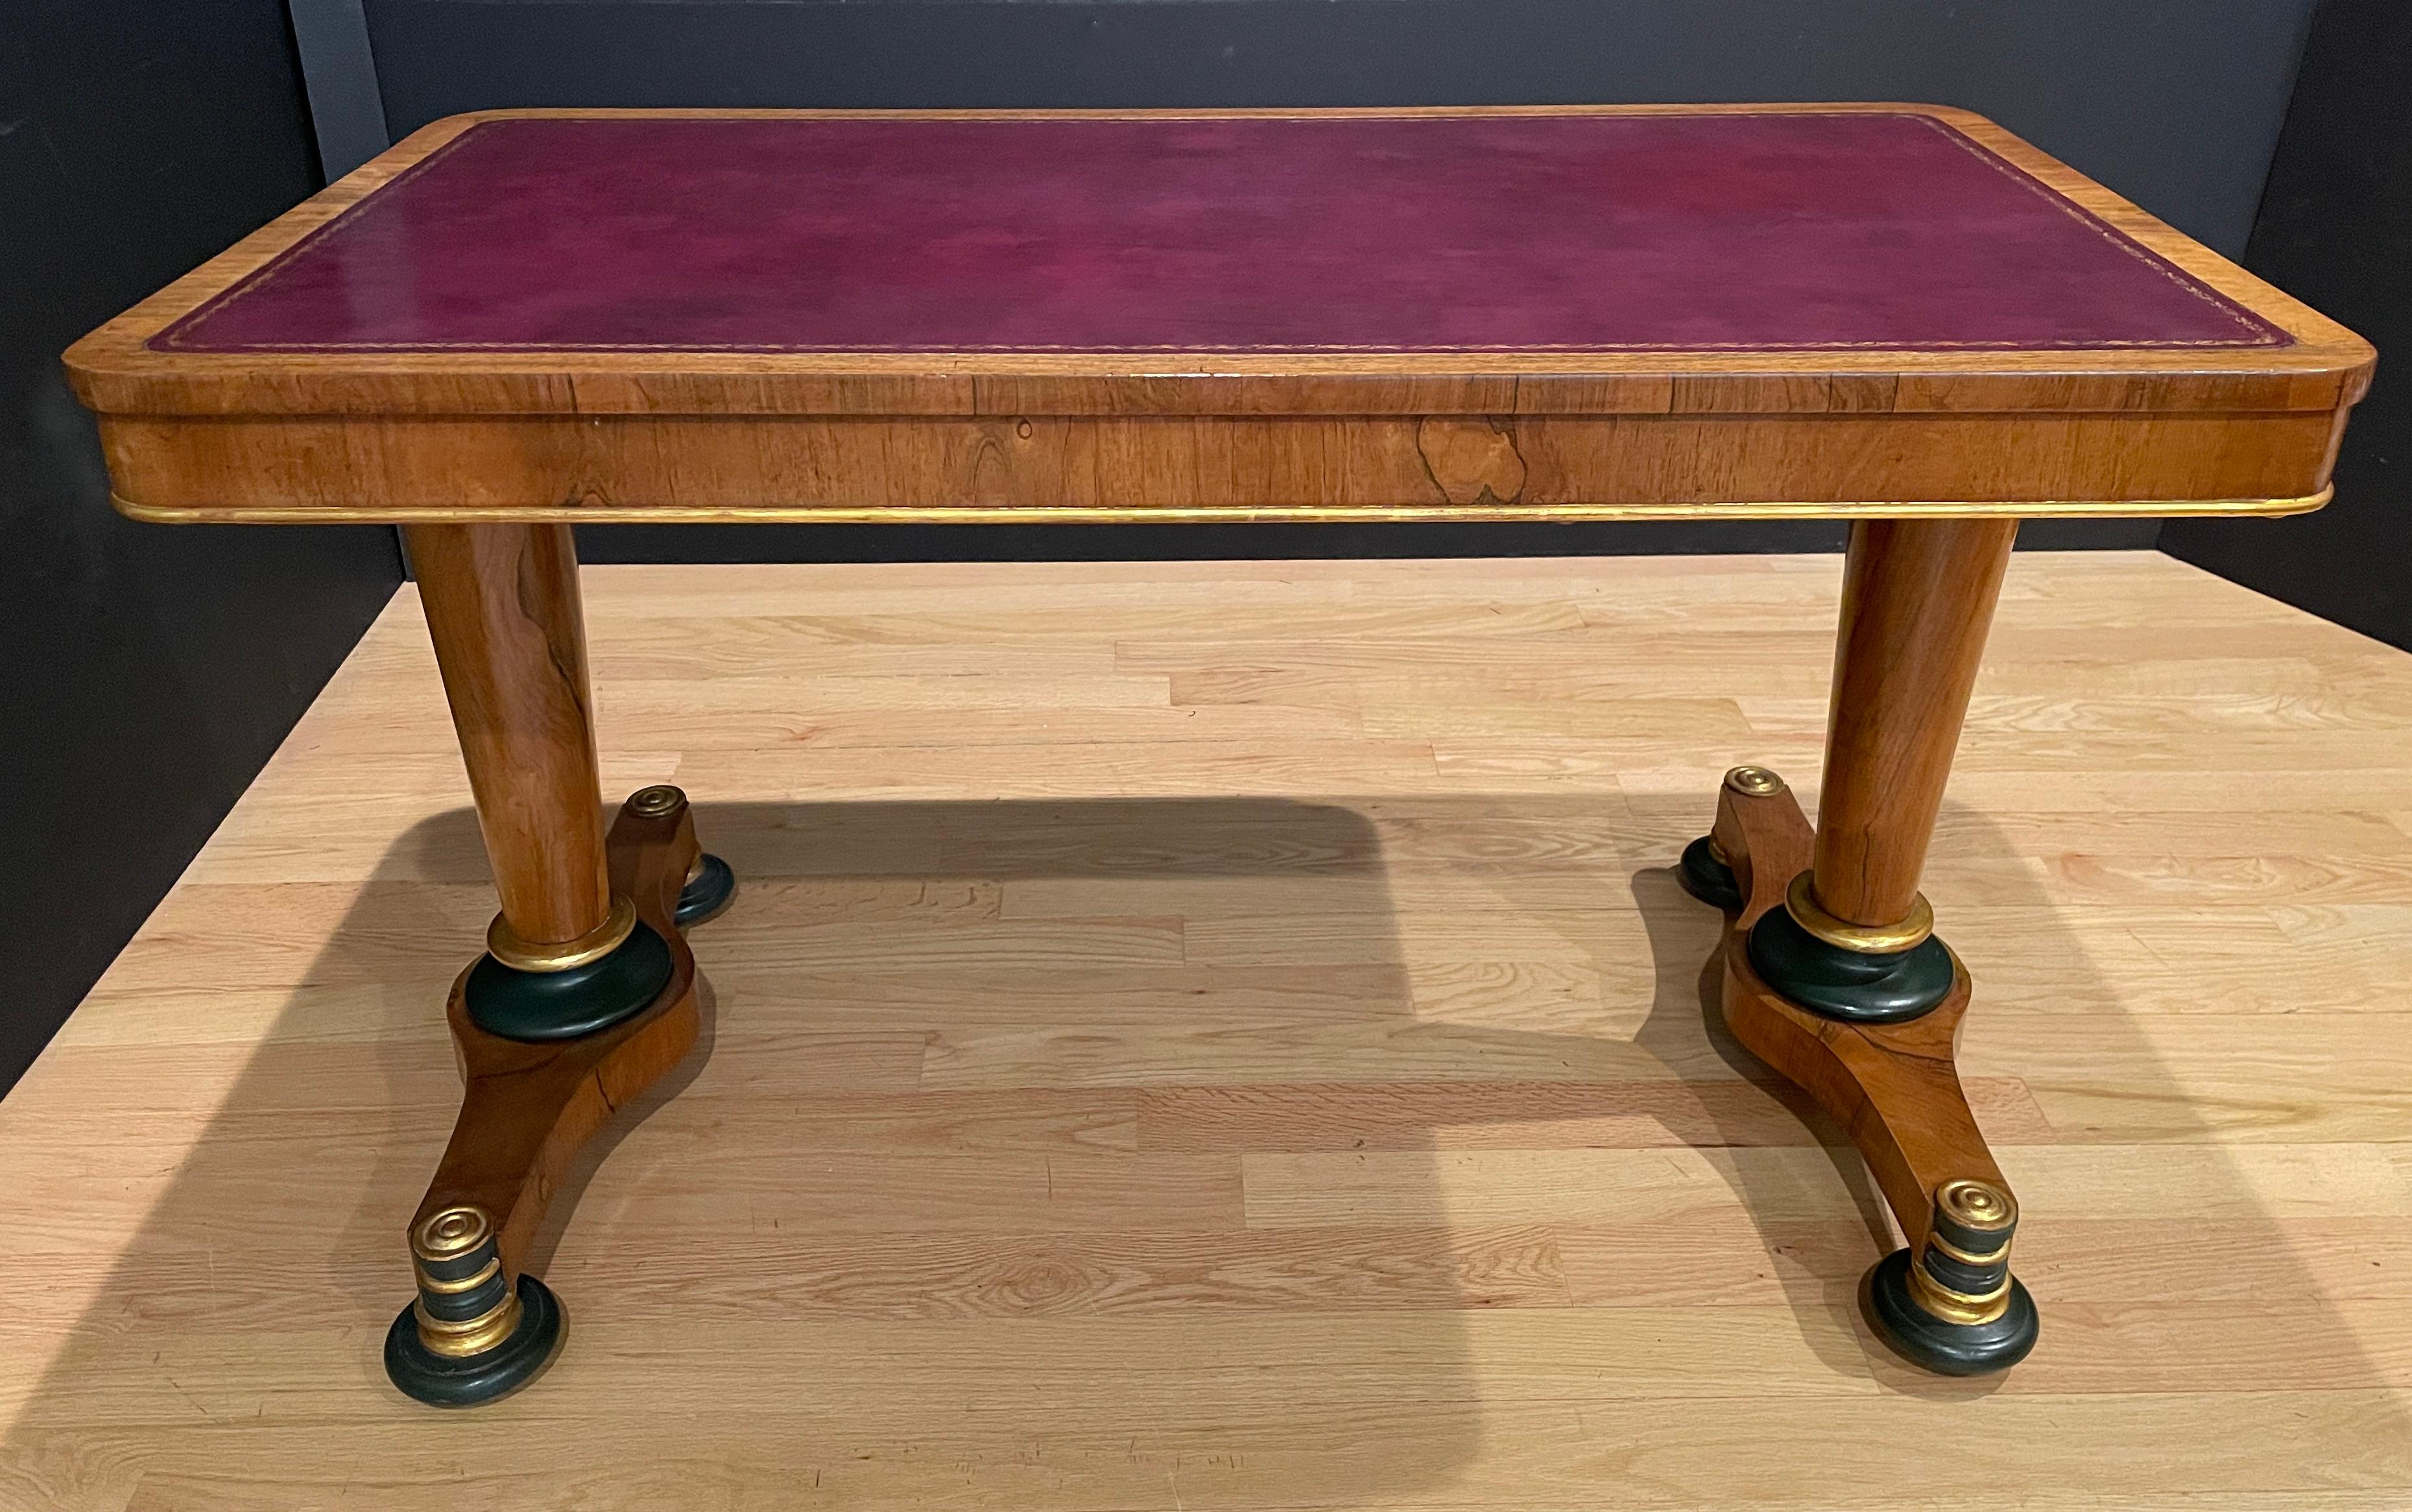 Fine quality tapered leg walnut, gilt and painted leather top library table. Burgundy tooled and gilt leather top. Tapered pedestal legs ending in small platform with gild details and bun feet.